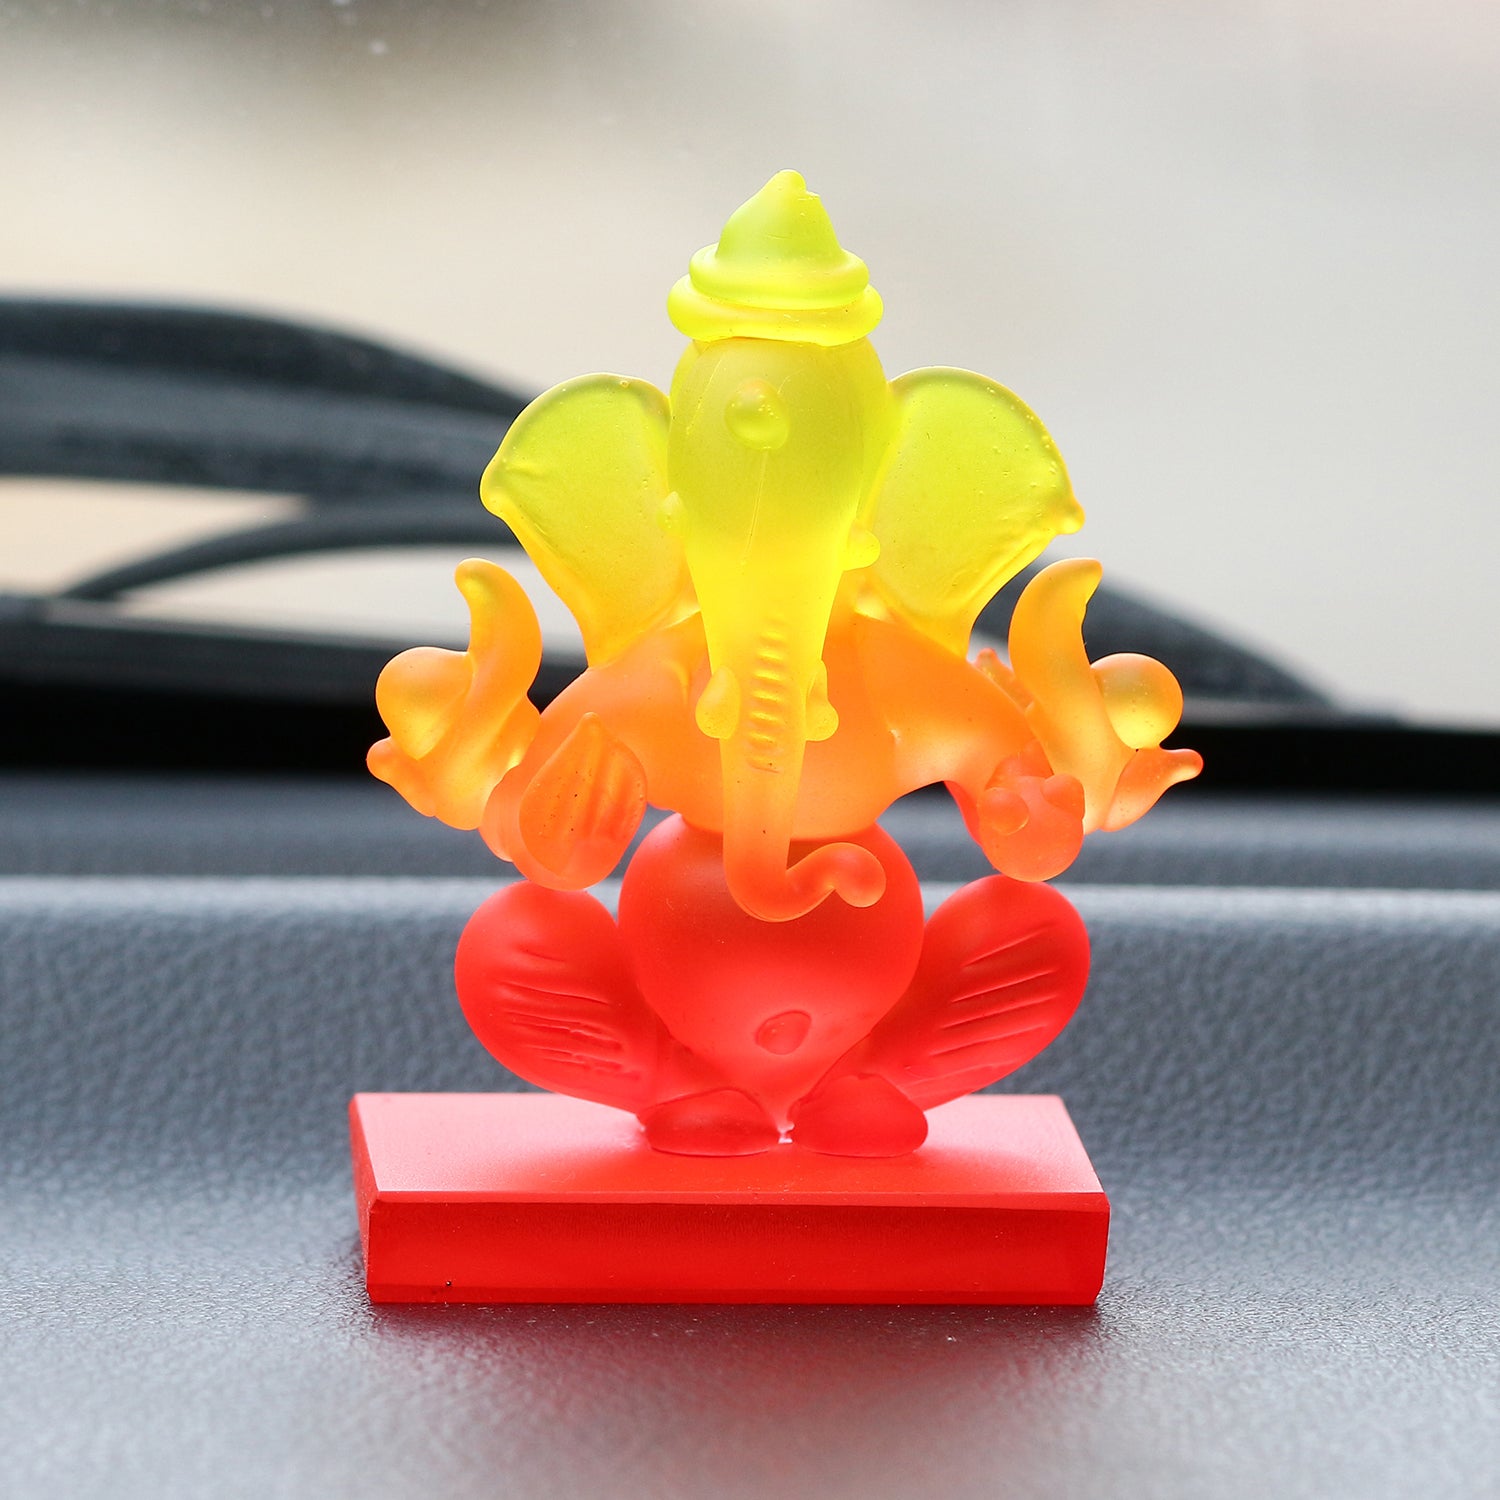 Yellow and Red Transparent Double Sided Crystal Ganesha Idol For Home, Office and Car Dashboard